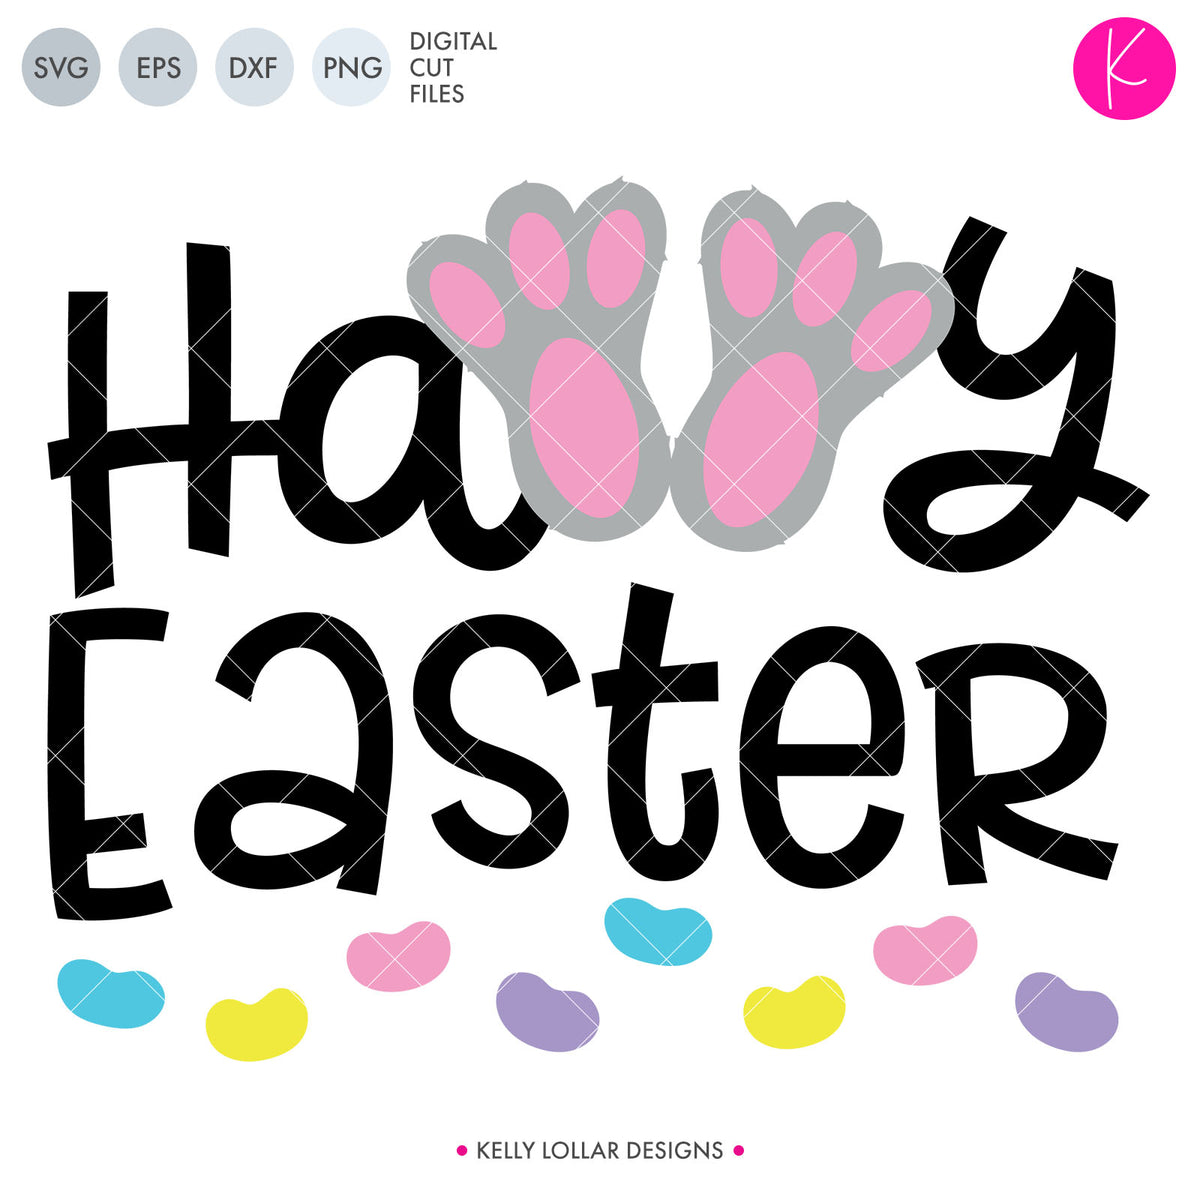 Download Happy Easter Bunny Feet SVG File | Kelly Lollar Designs